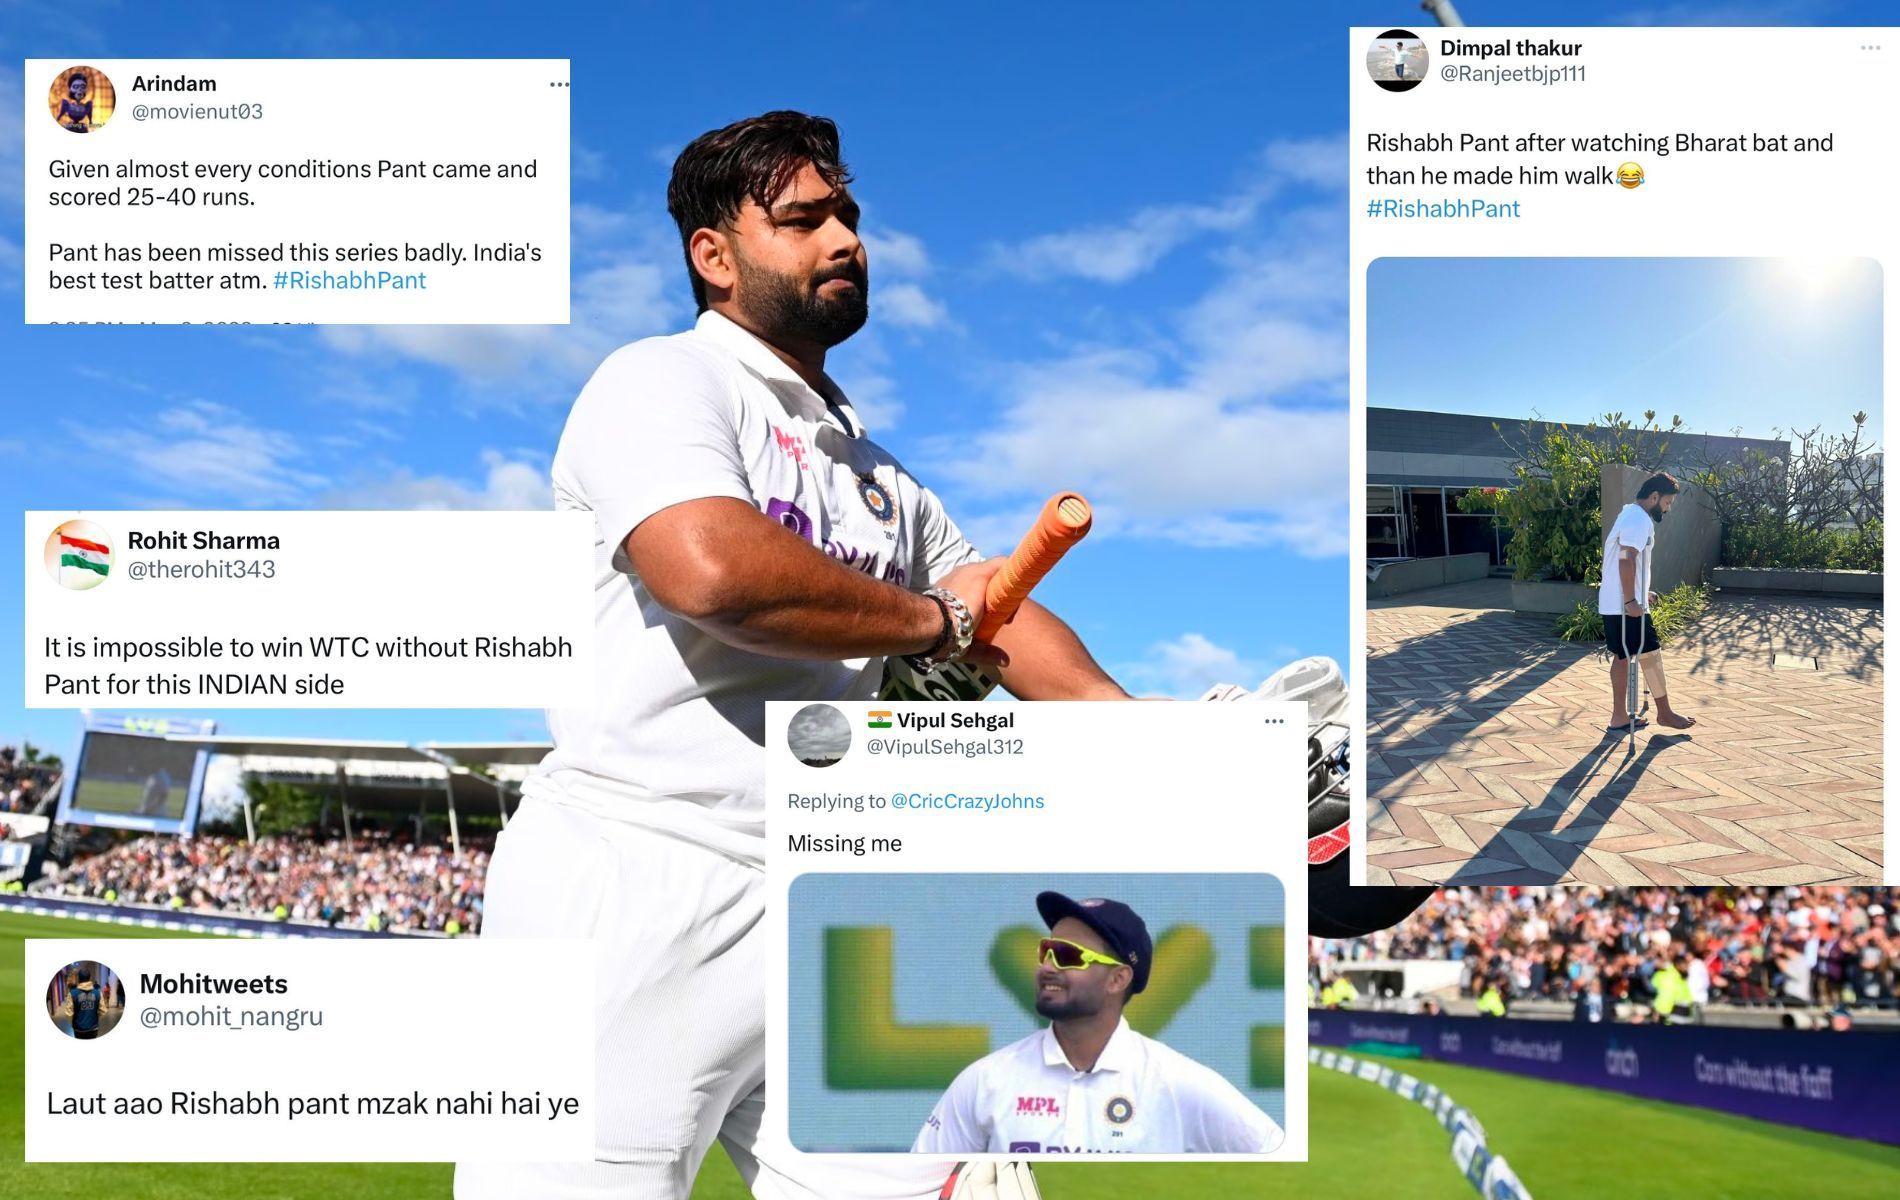 Rishabh Pant trended on social media after India